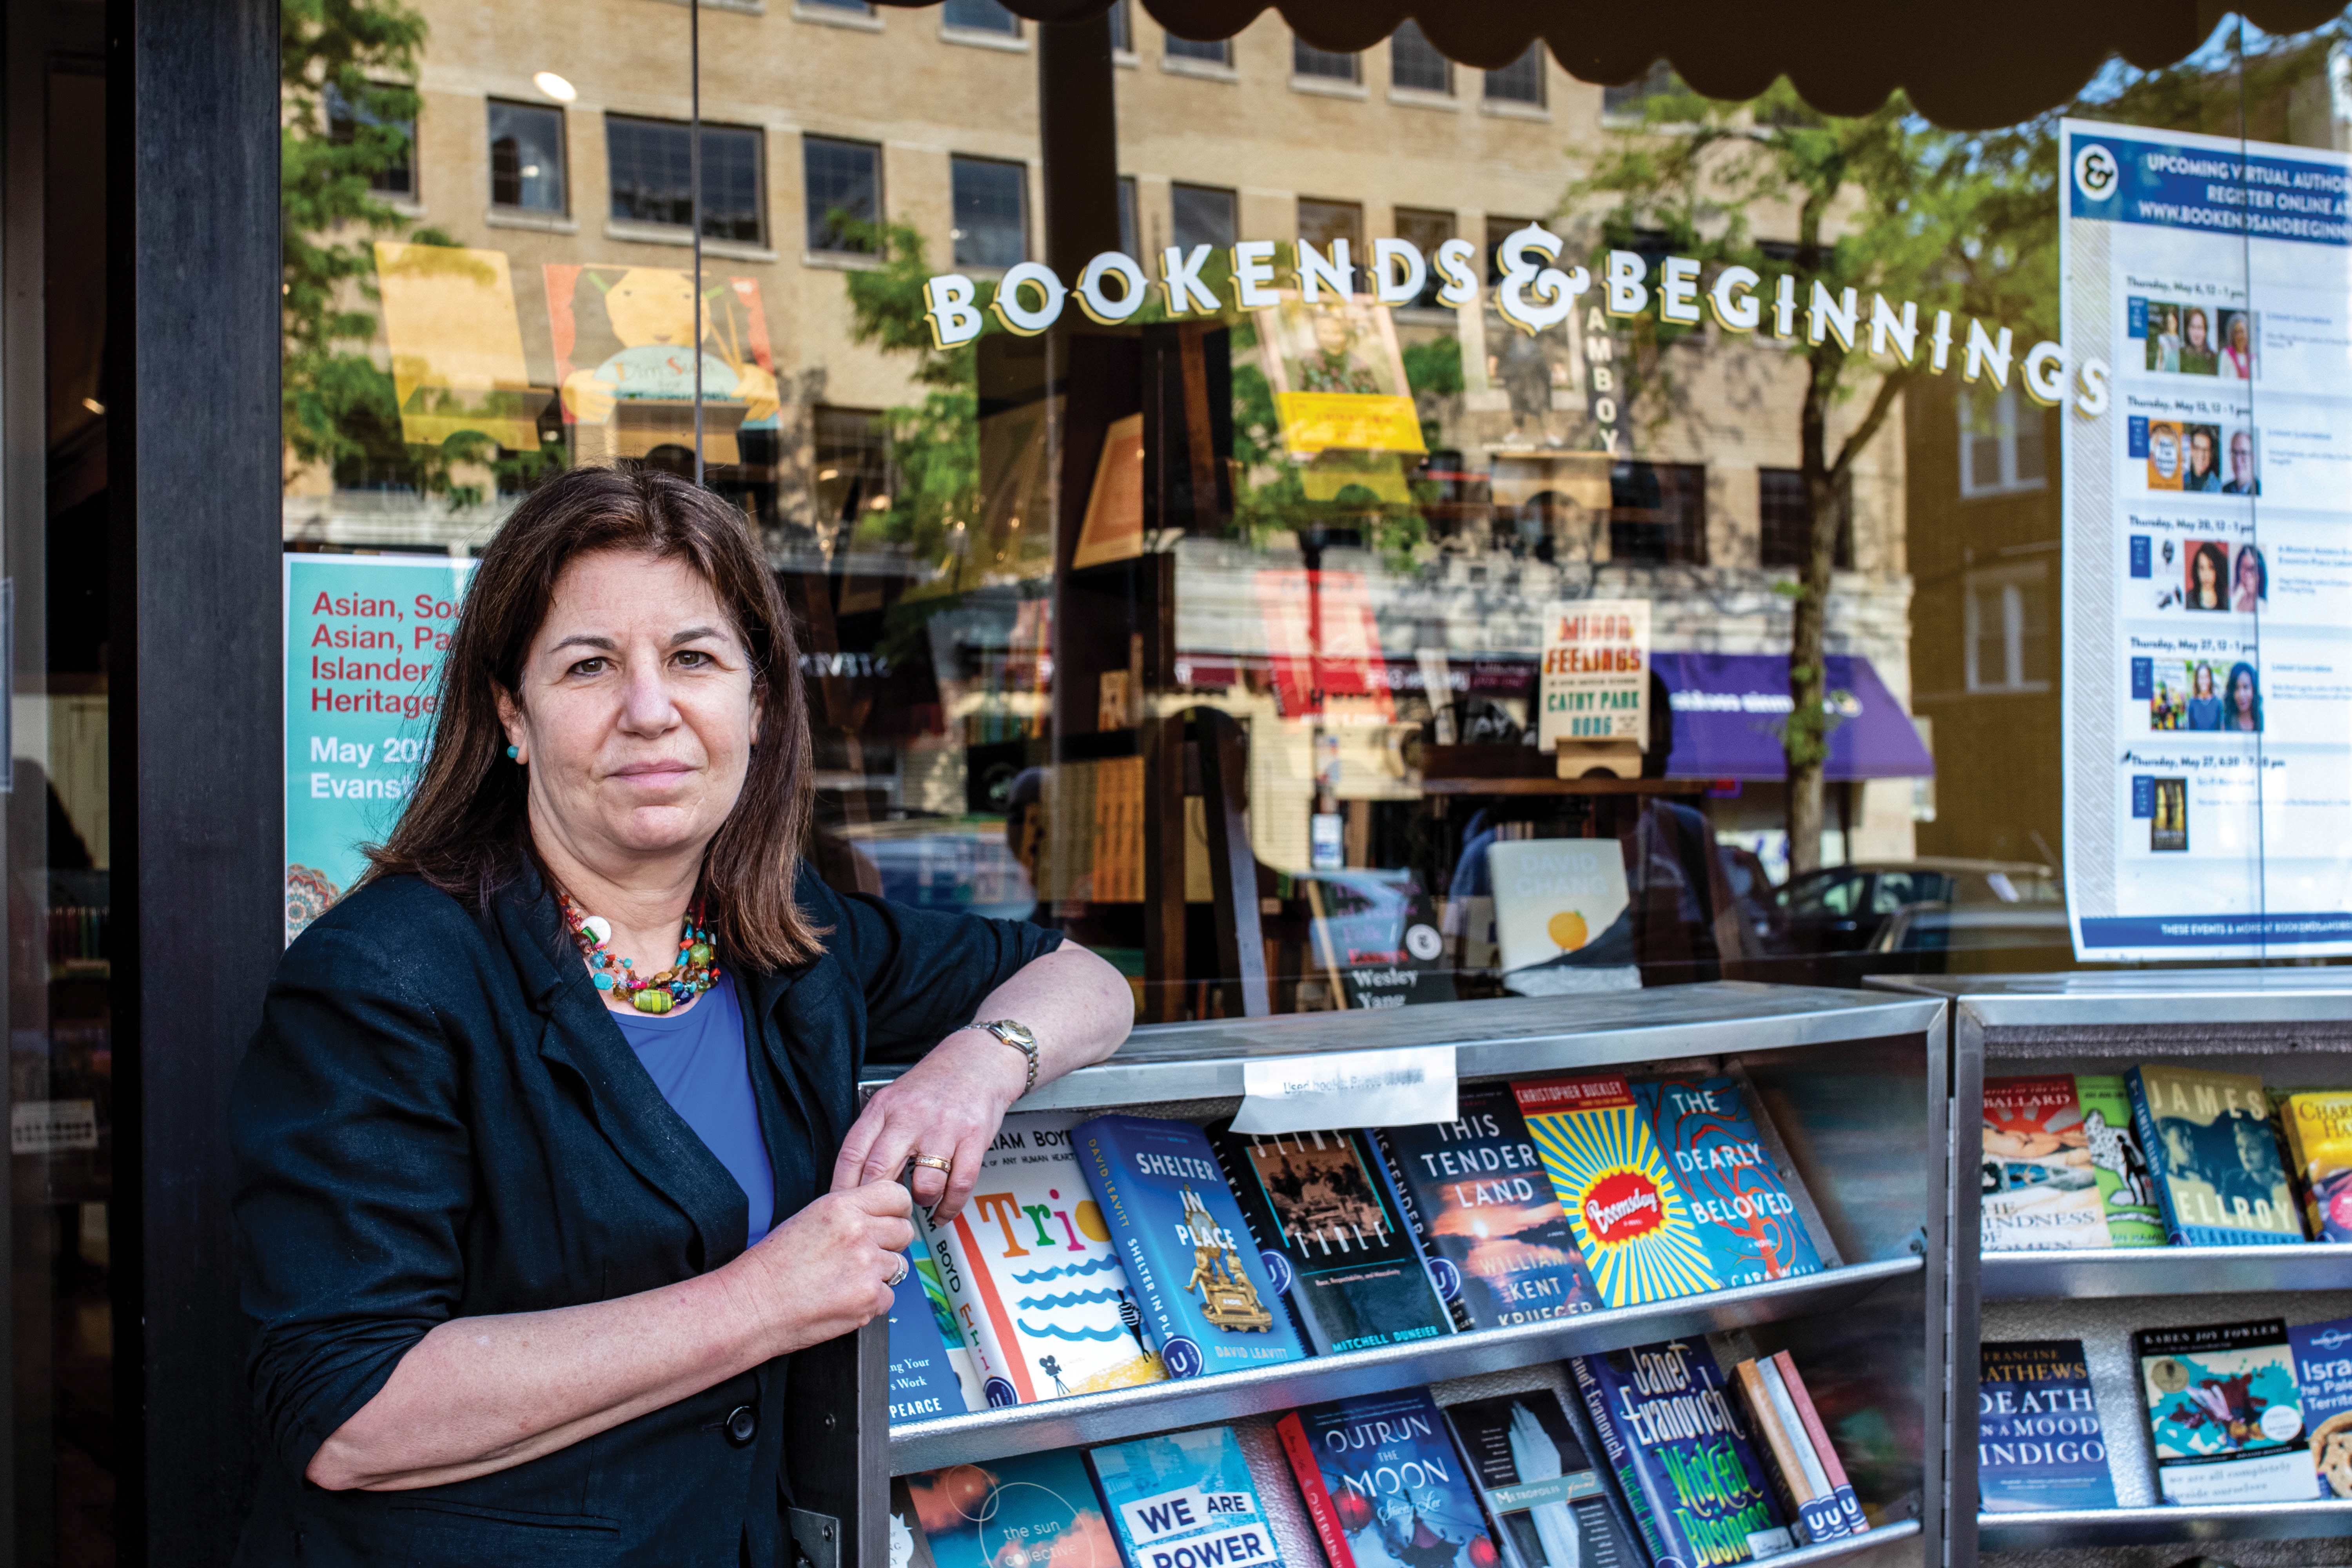 Nina Barrett, owner of Bookends & Beginnings, outside of the bookstore on May 22.